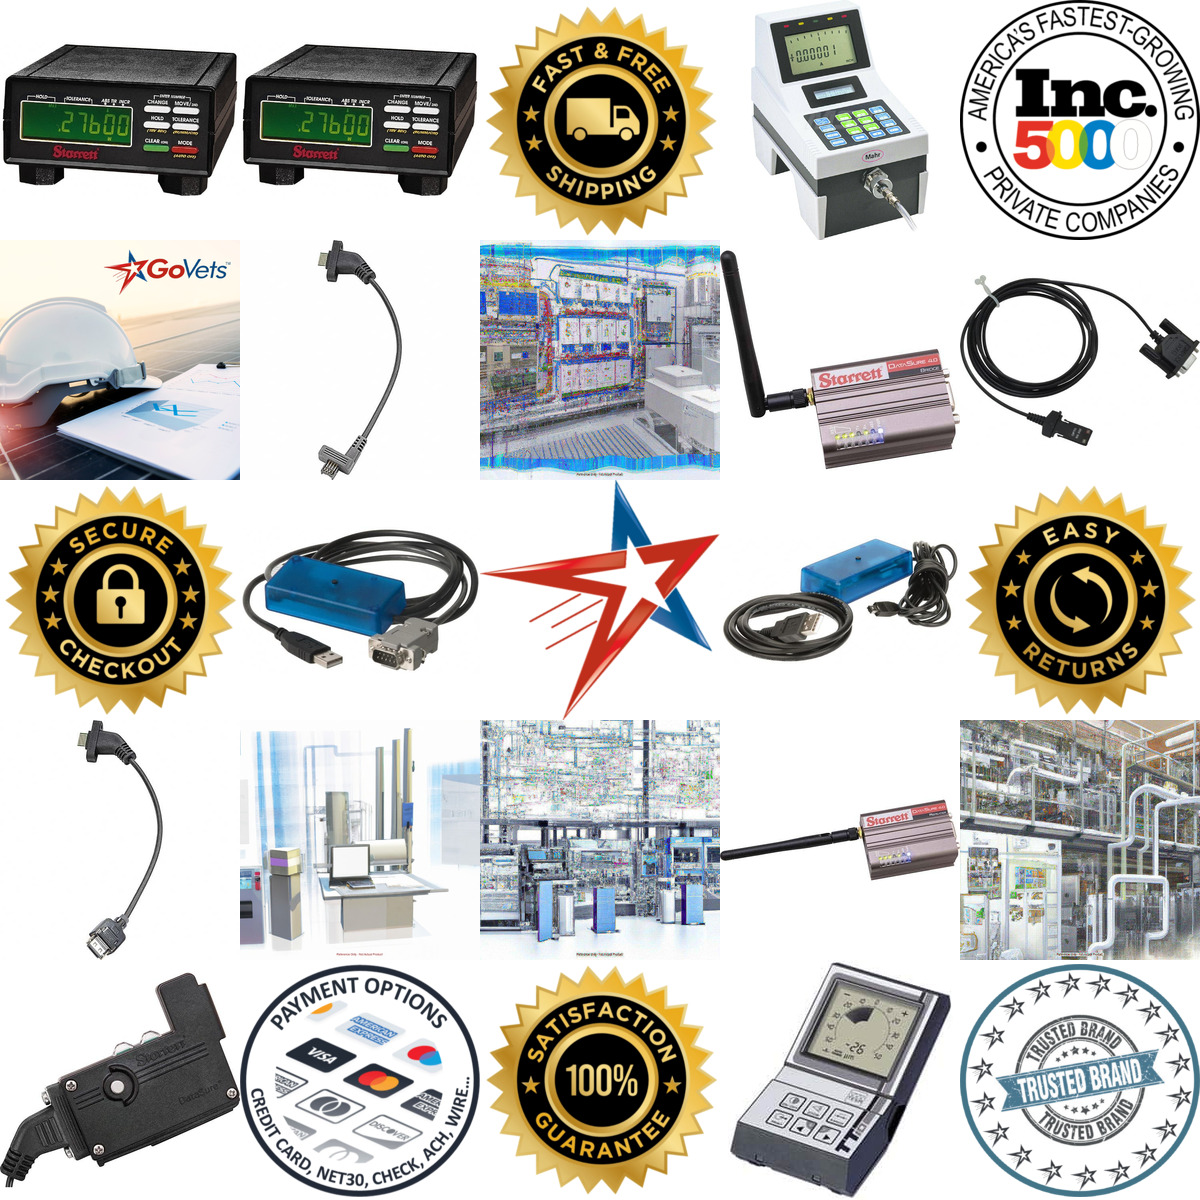 A selection of Spc Data Collection and Processing Systems products on GoVets